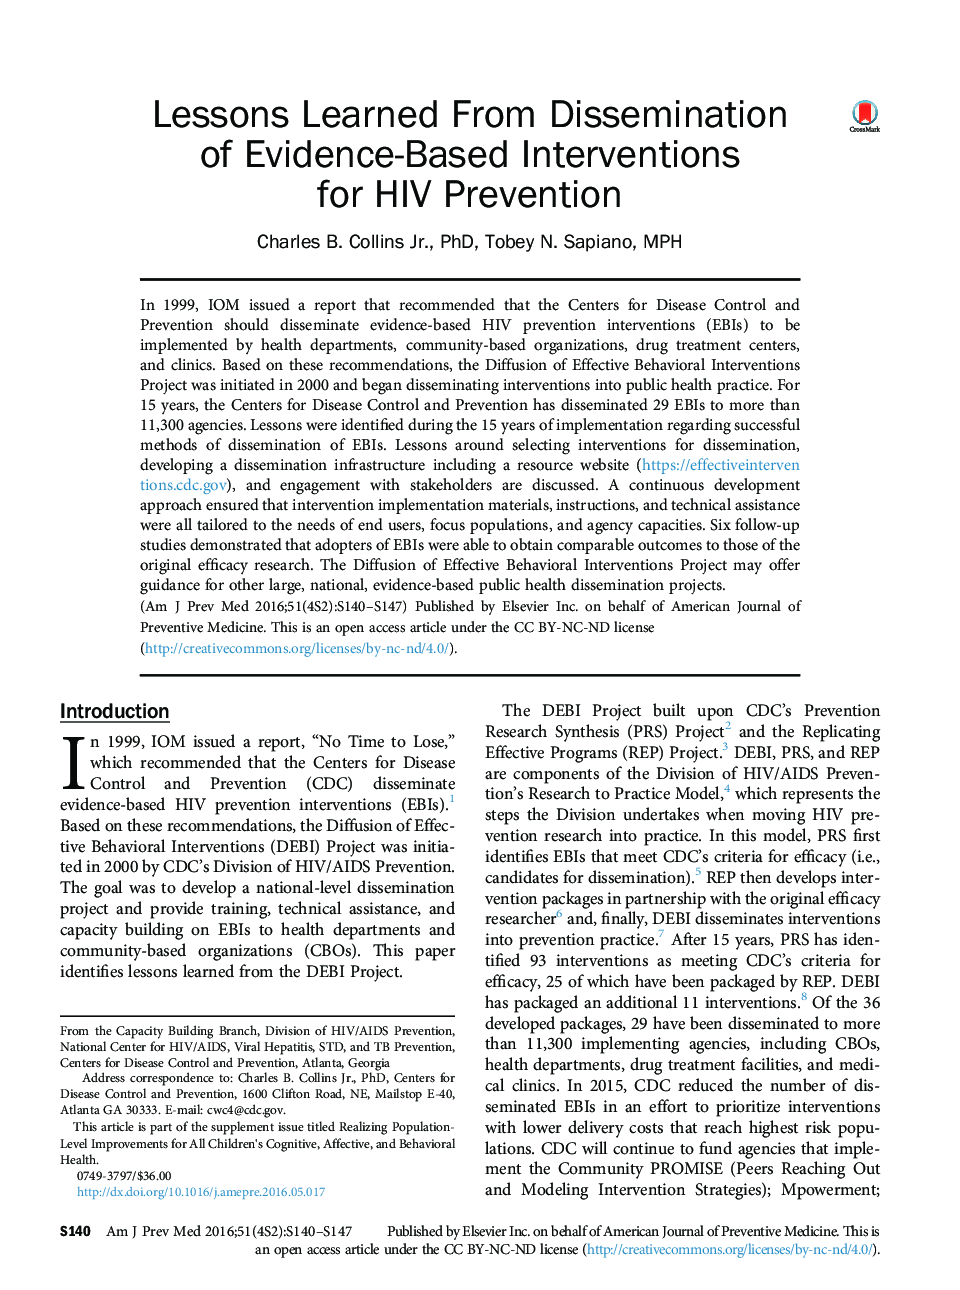 Lessons Learned From Dissemination of Evidence-Based Interventions for HIV Prevention